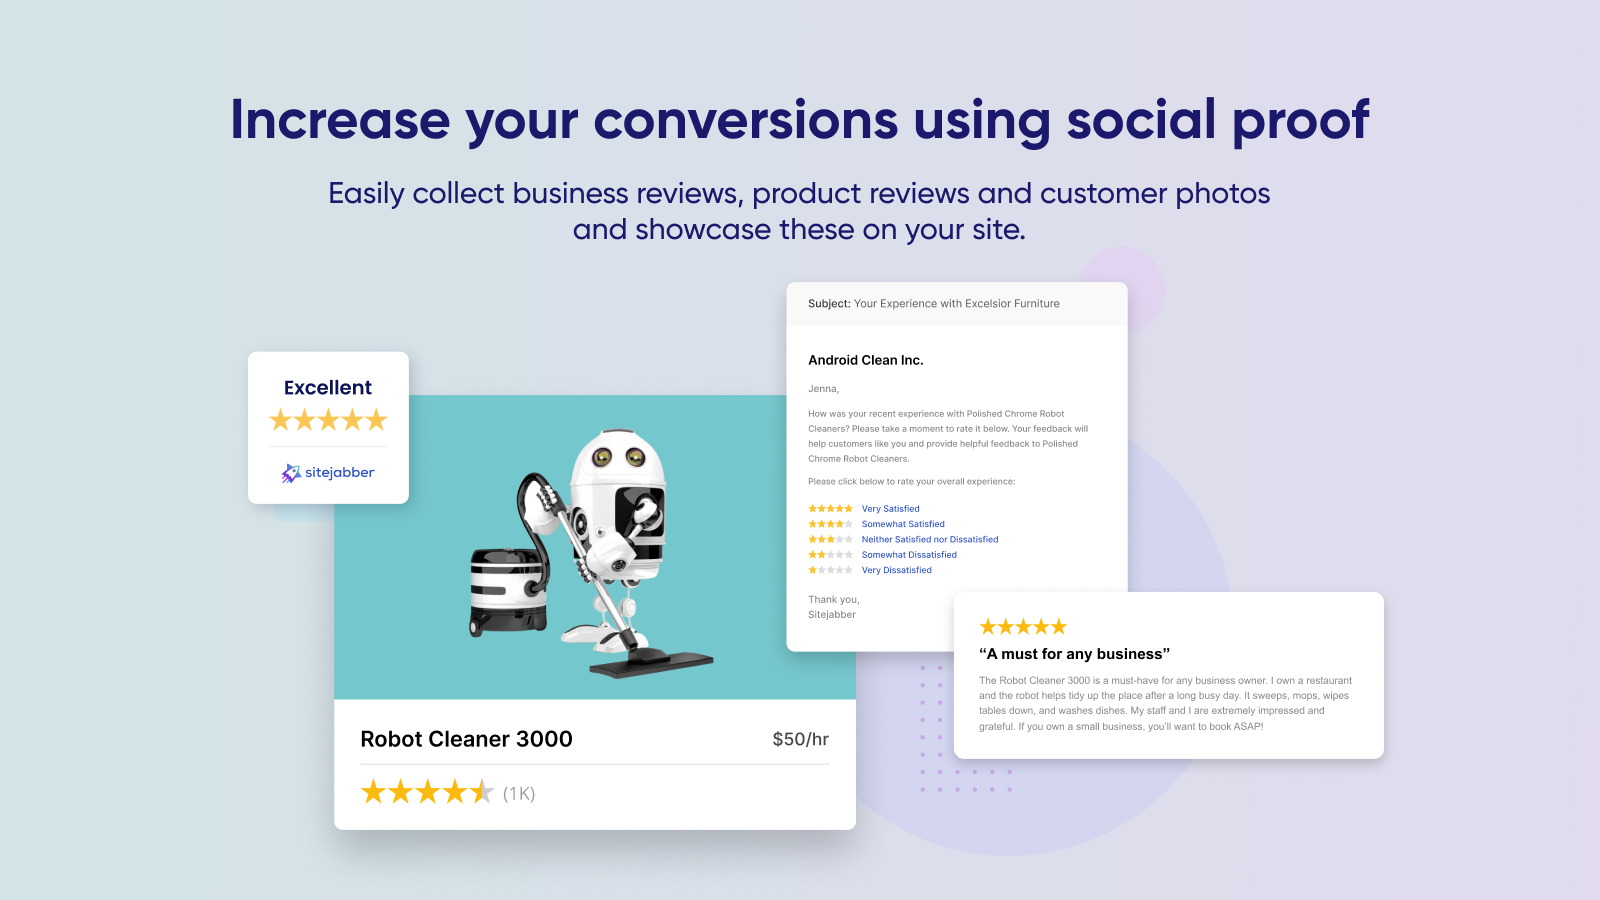 Increase your conversions using social proof